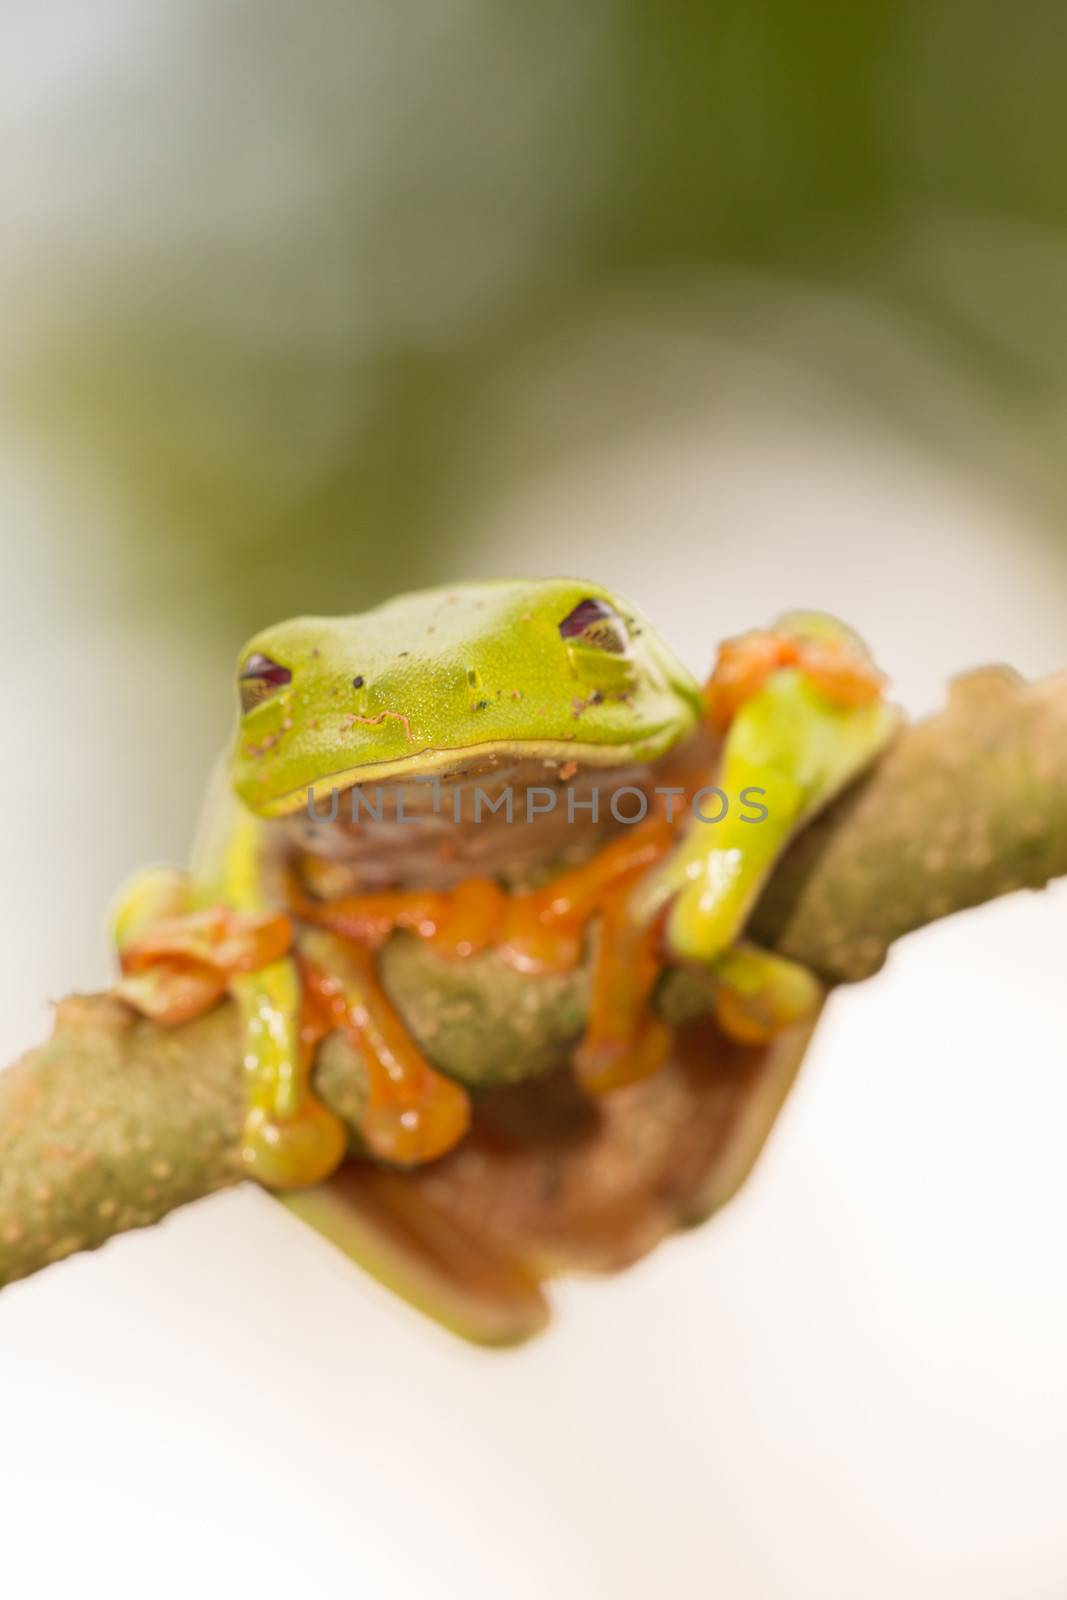 Red-Eyed Tree Frog by watchtheworld